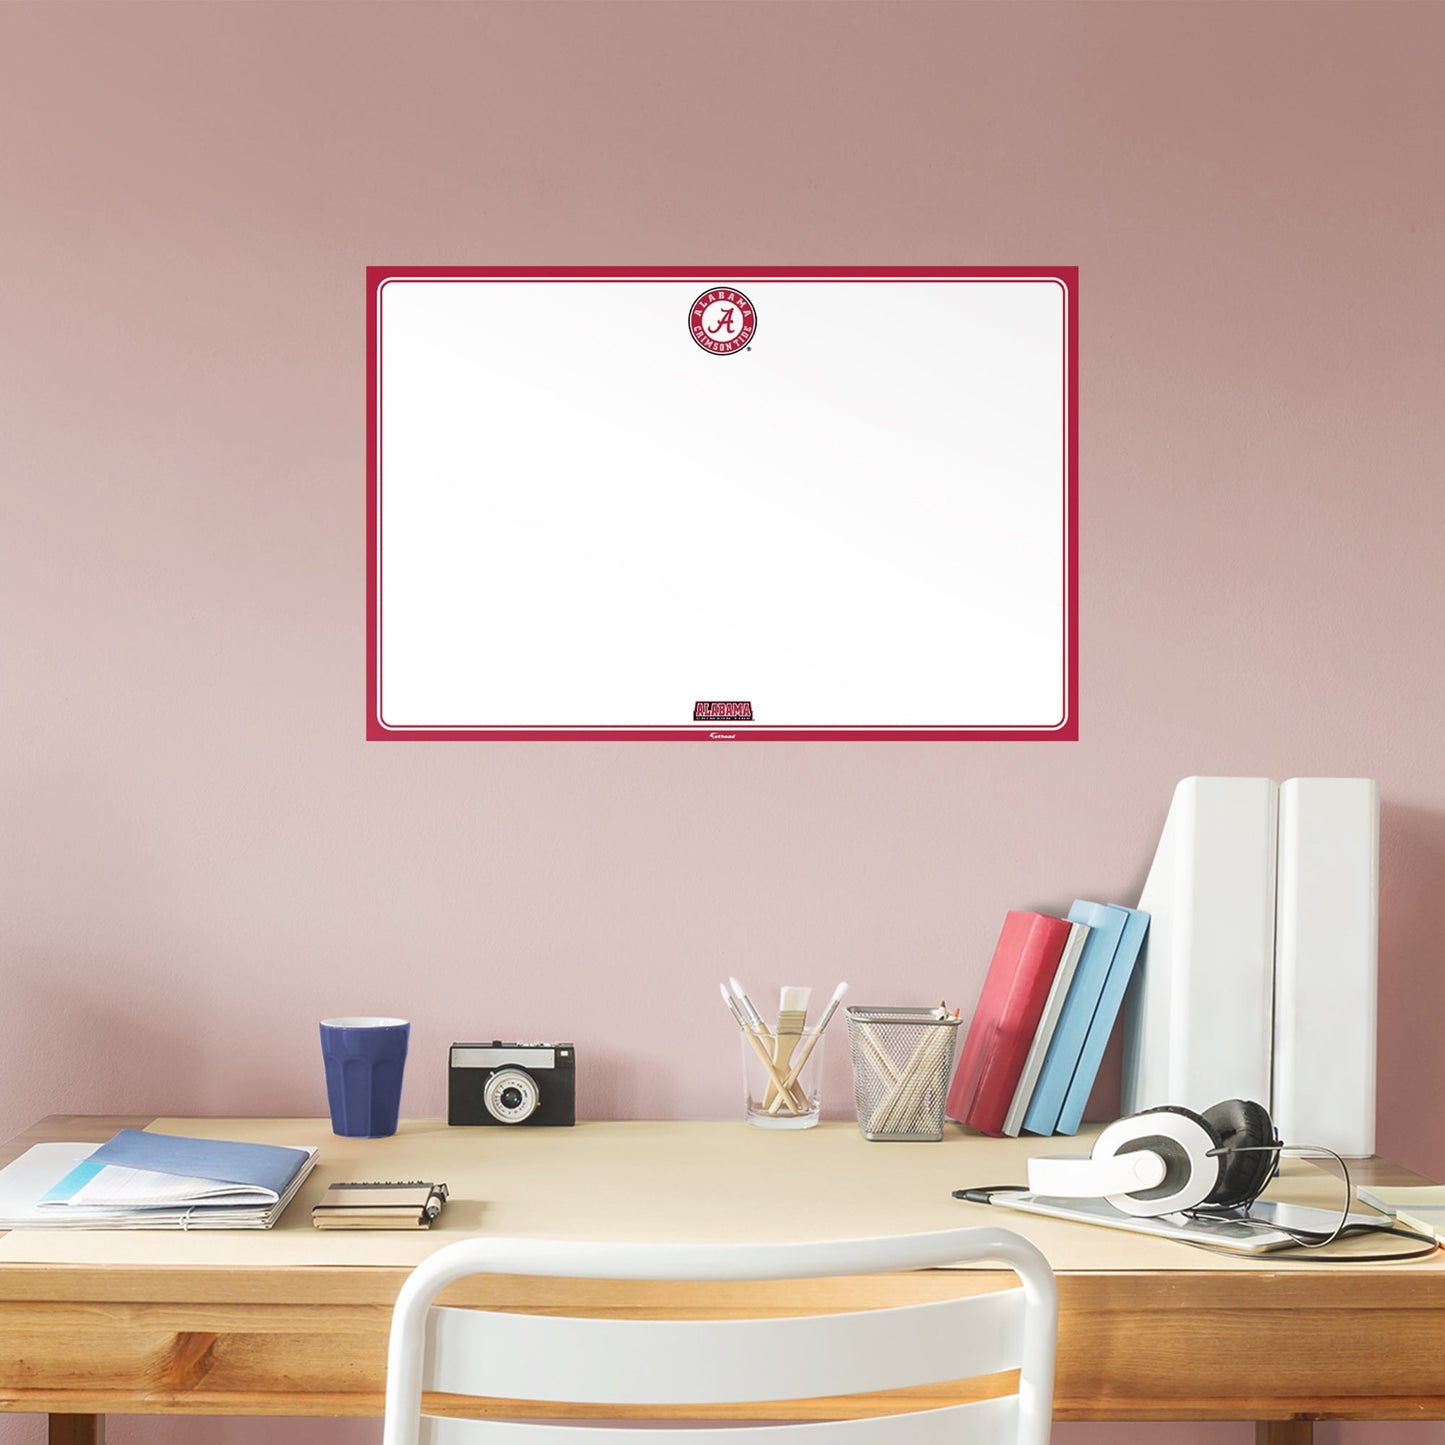 Alabama Crimson Tide: Dry Erase White Board - Officially Licensed NCAA Removable Adhesive Decal